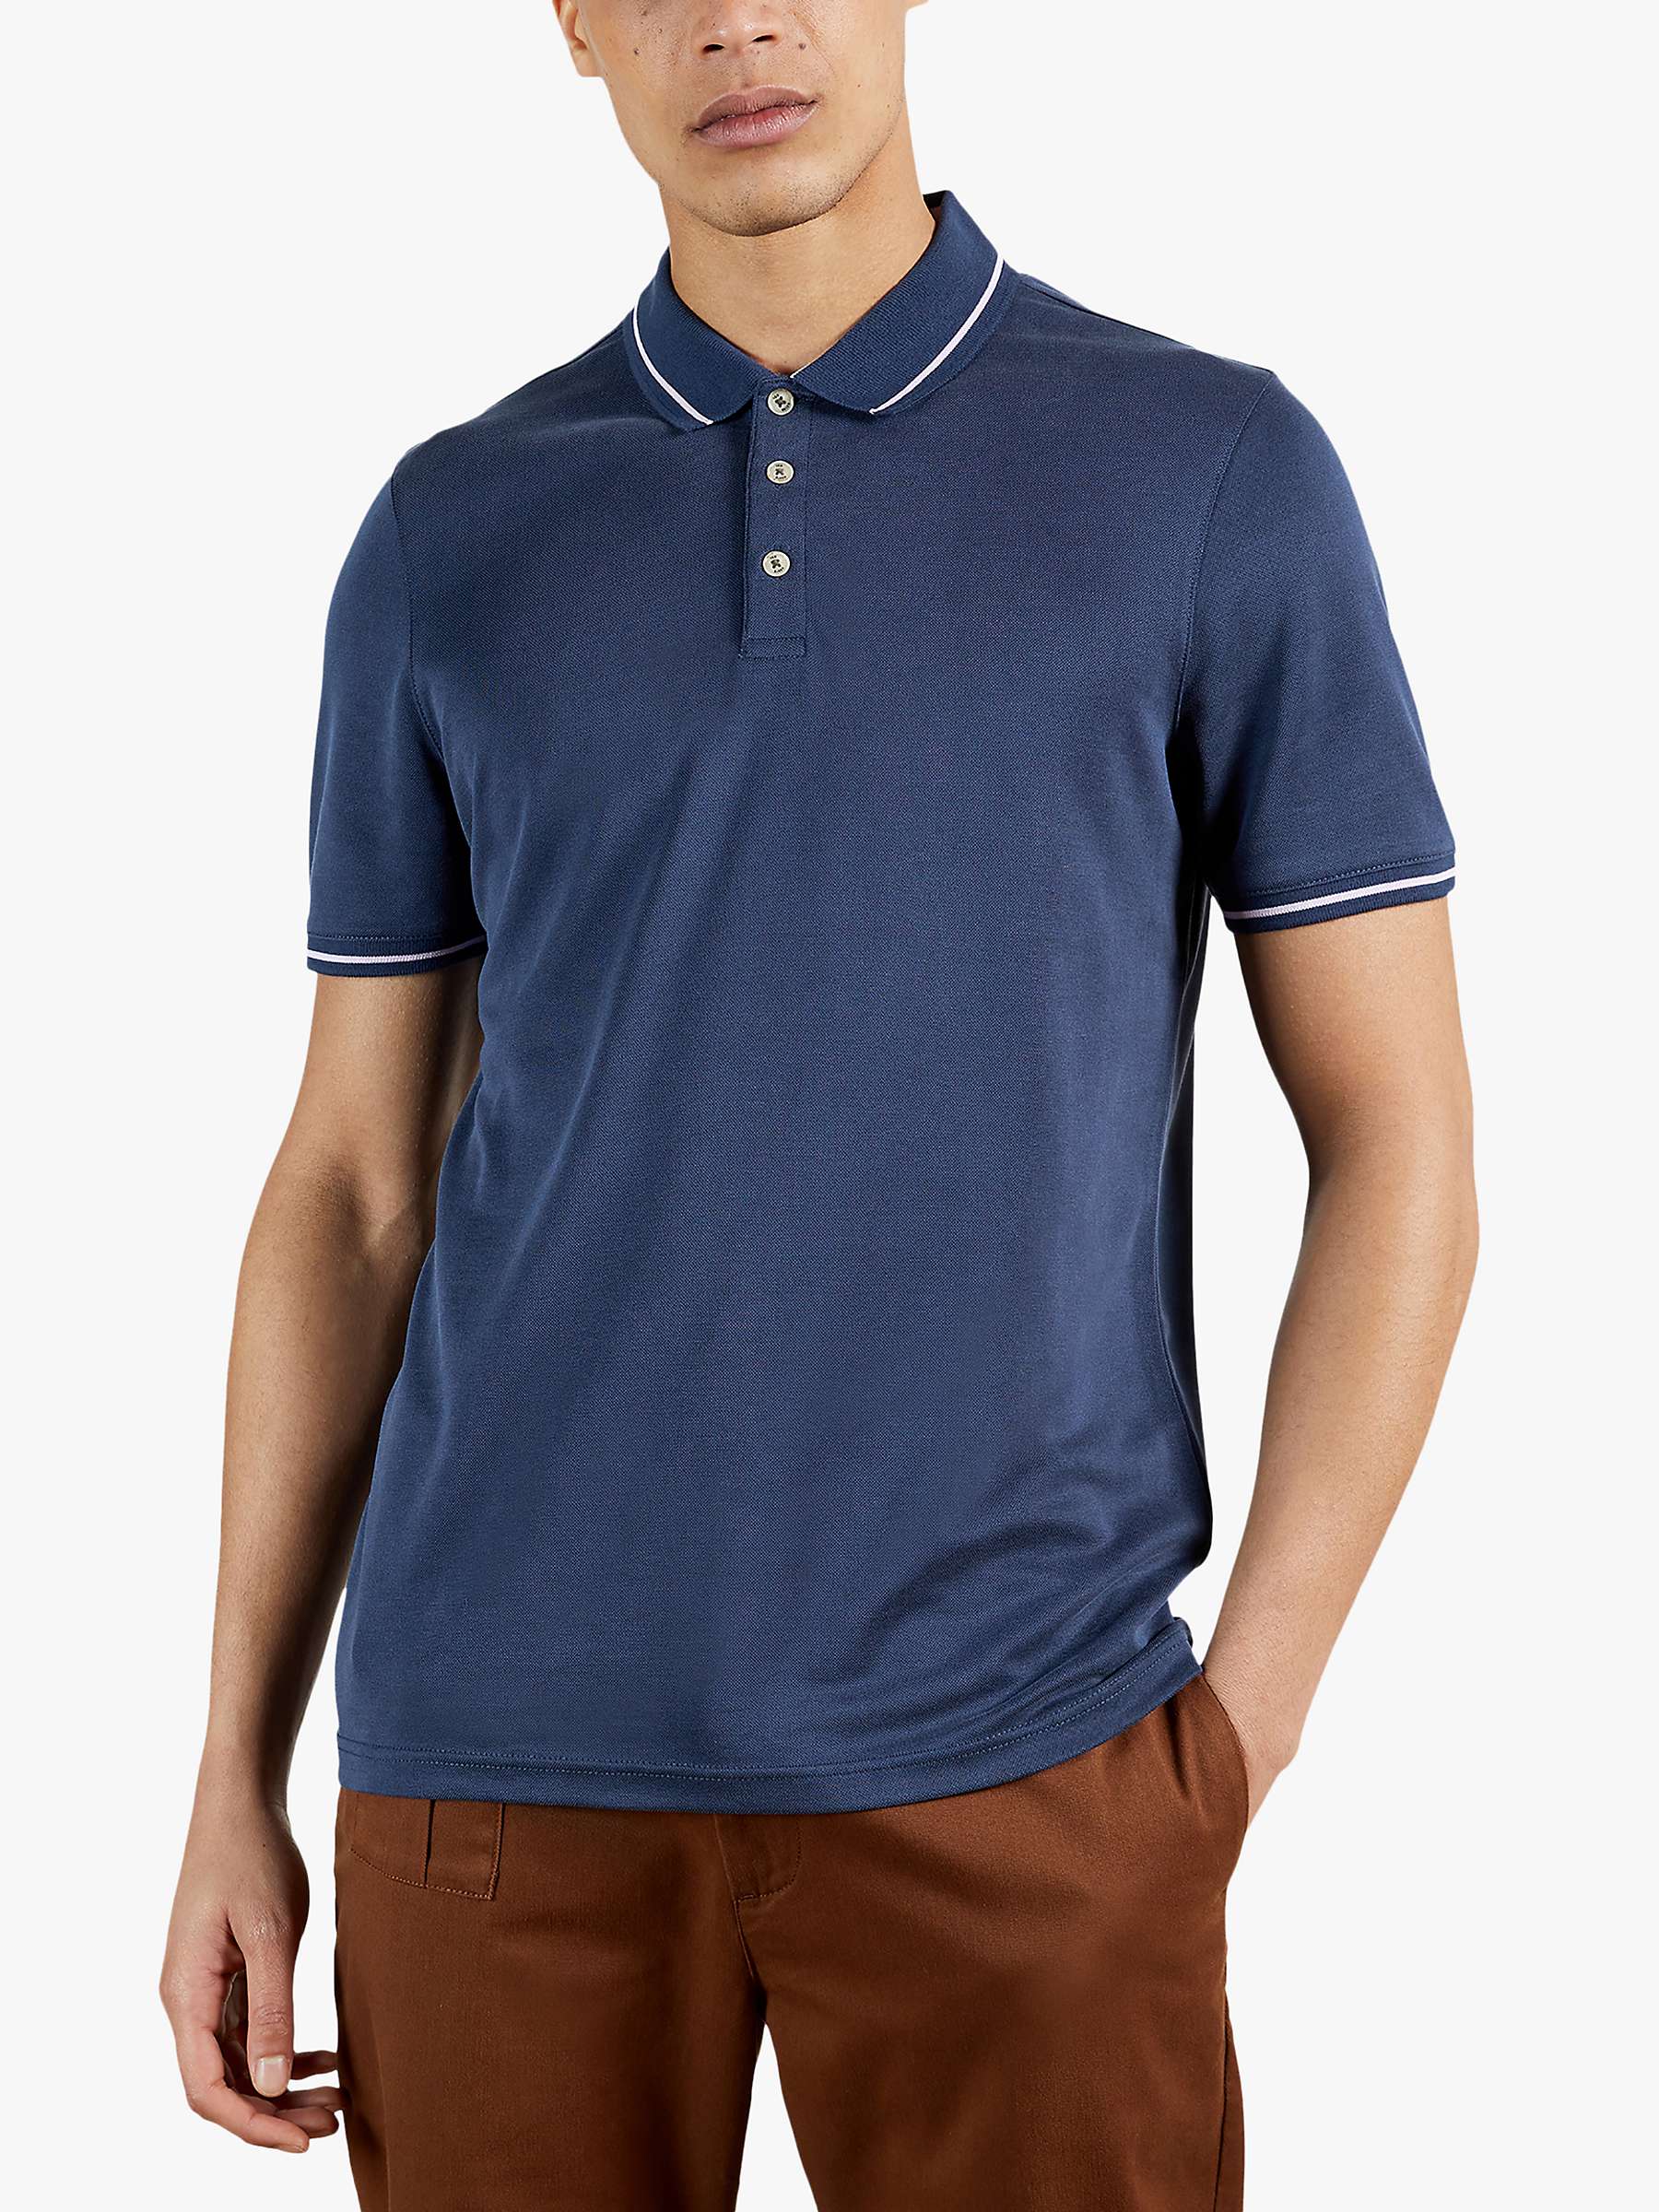 Ted Baker Gelpen Polo Shirt, Mid Blue at John Lewis & Partners